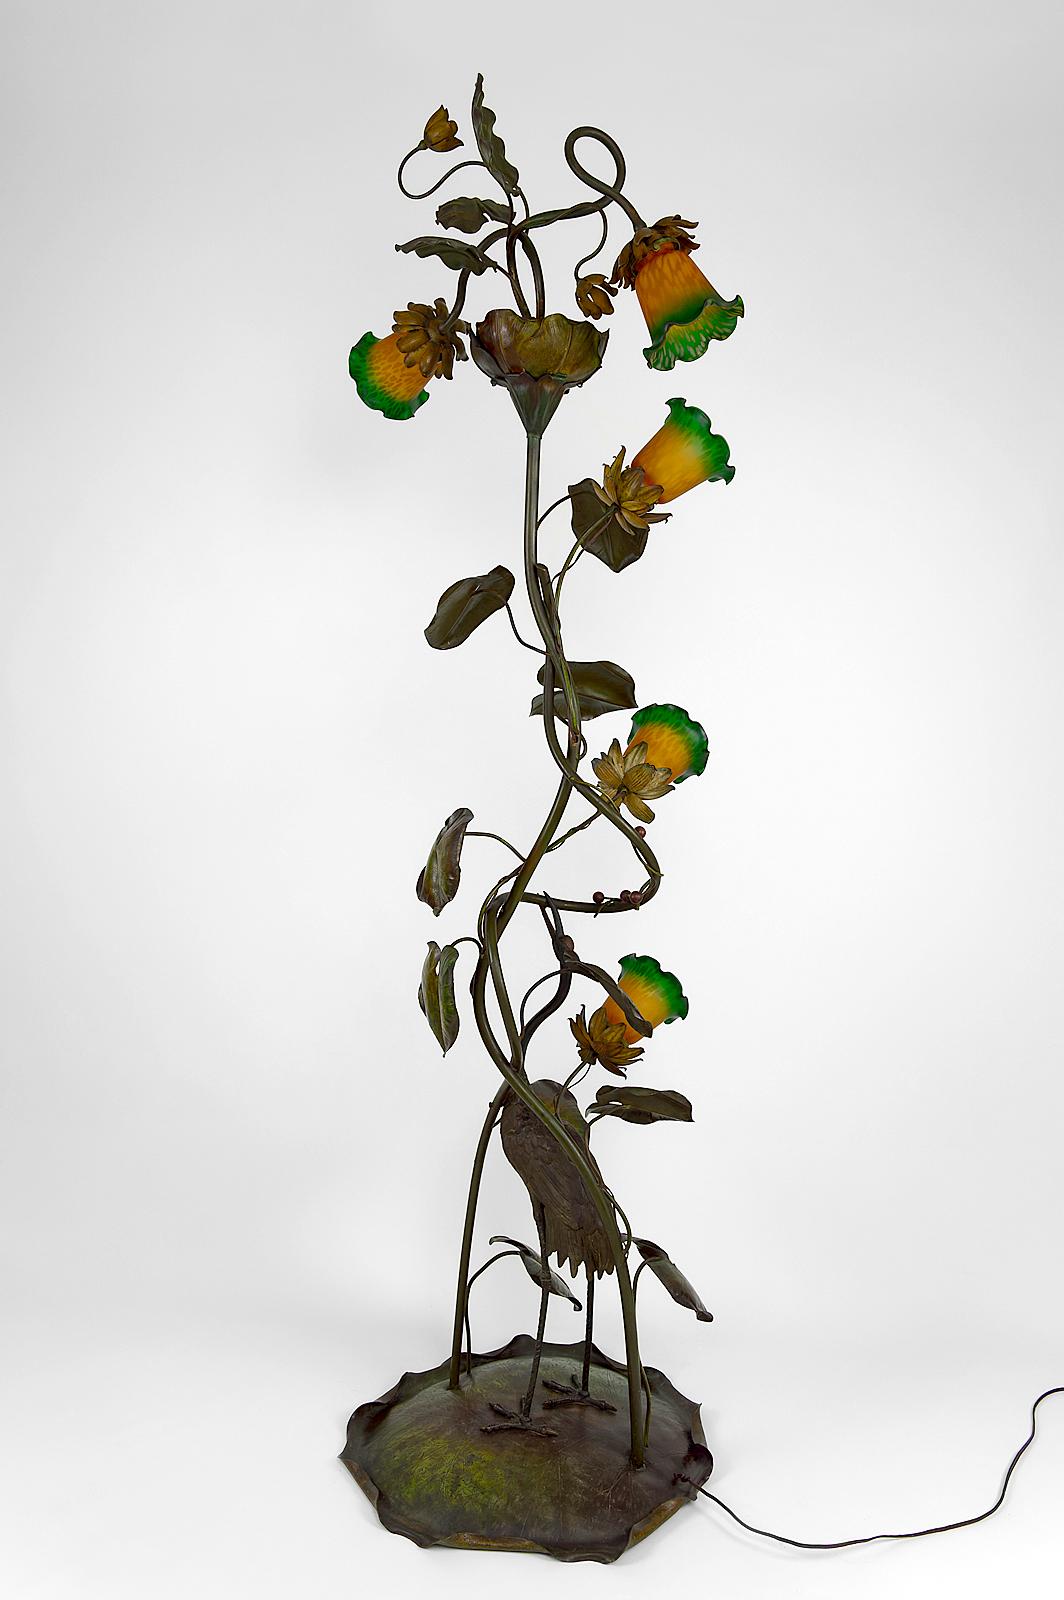 An exceptional piece!

Superb sculpture floor lamp in patinated and painted bronze and brass, depicting a Japanese crane (tsuru) / heron / wading bird picking red berries in the middle of lush nature (flowers, water lily leaves).

5 lights with